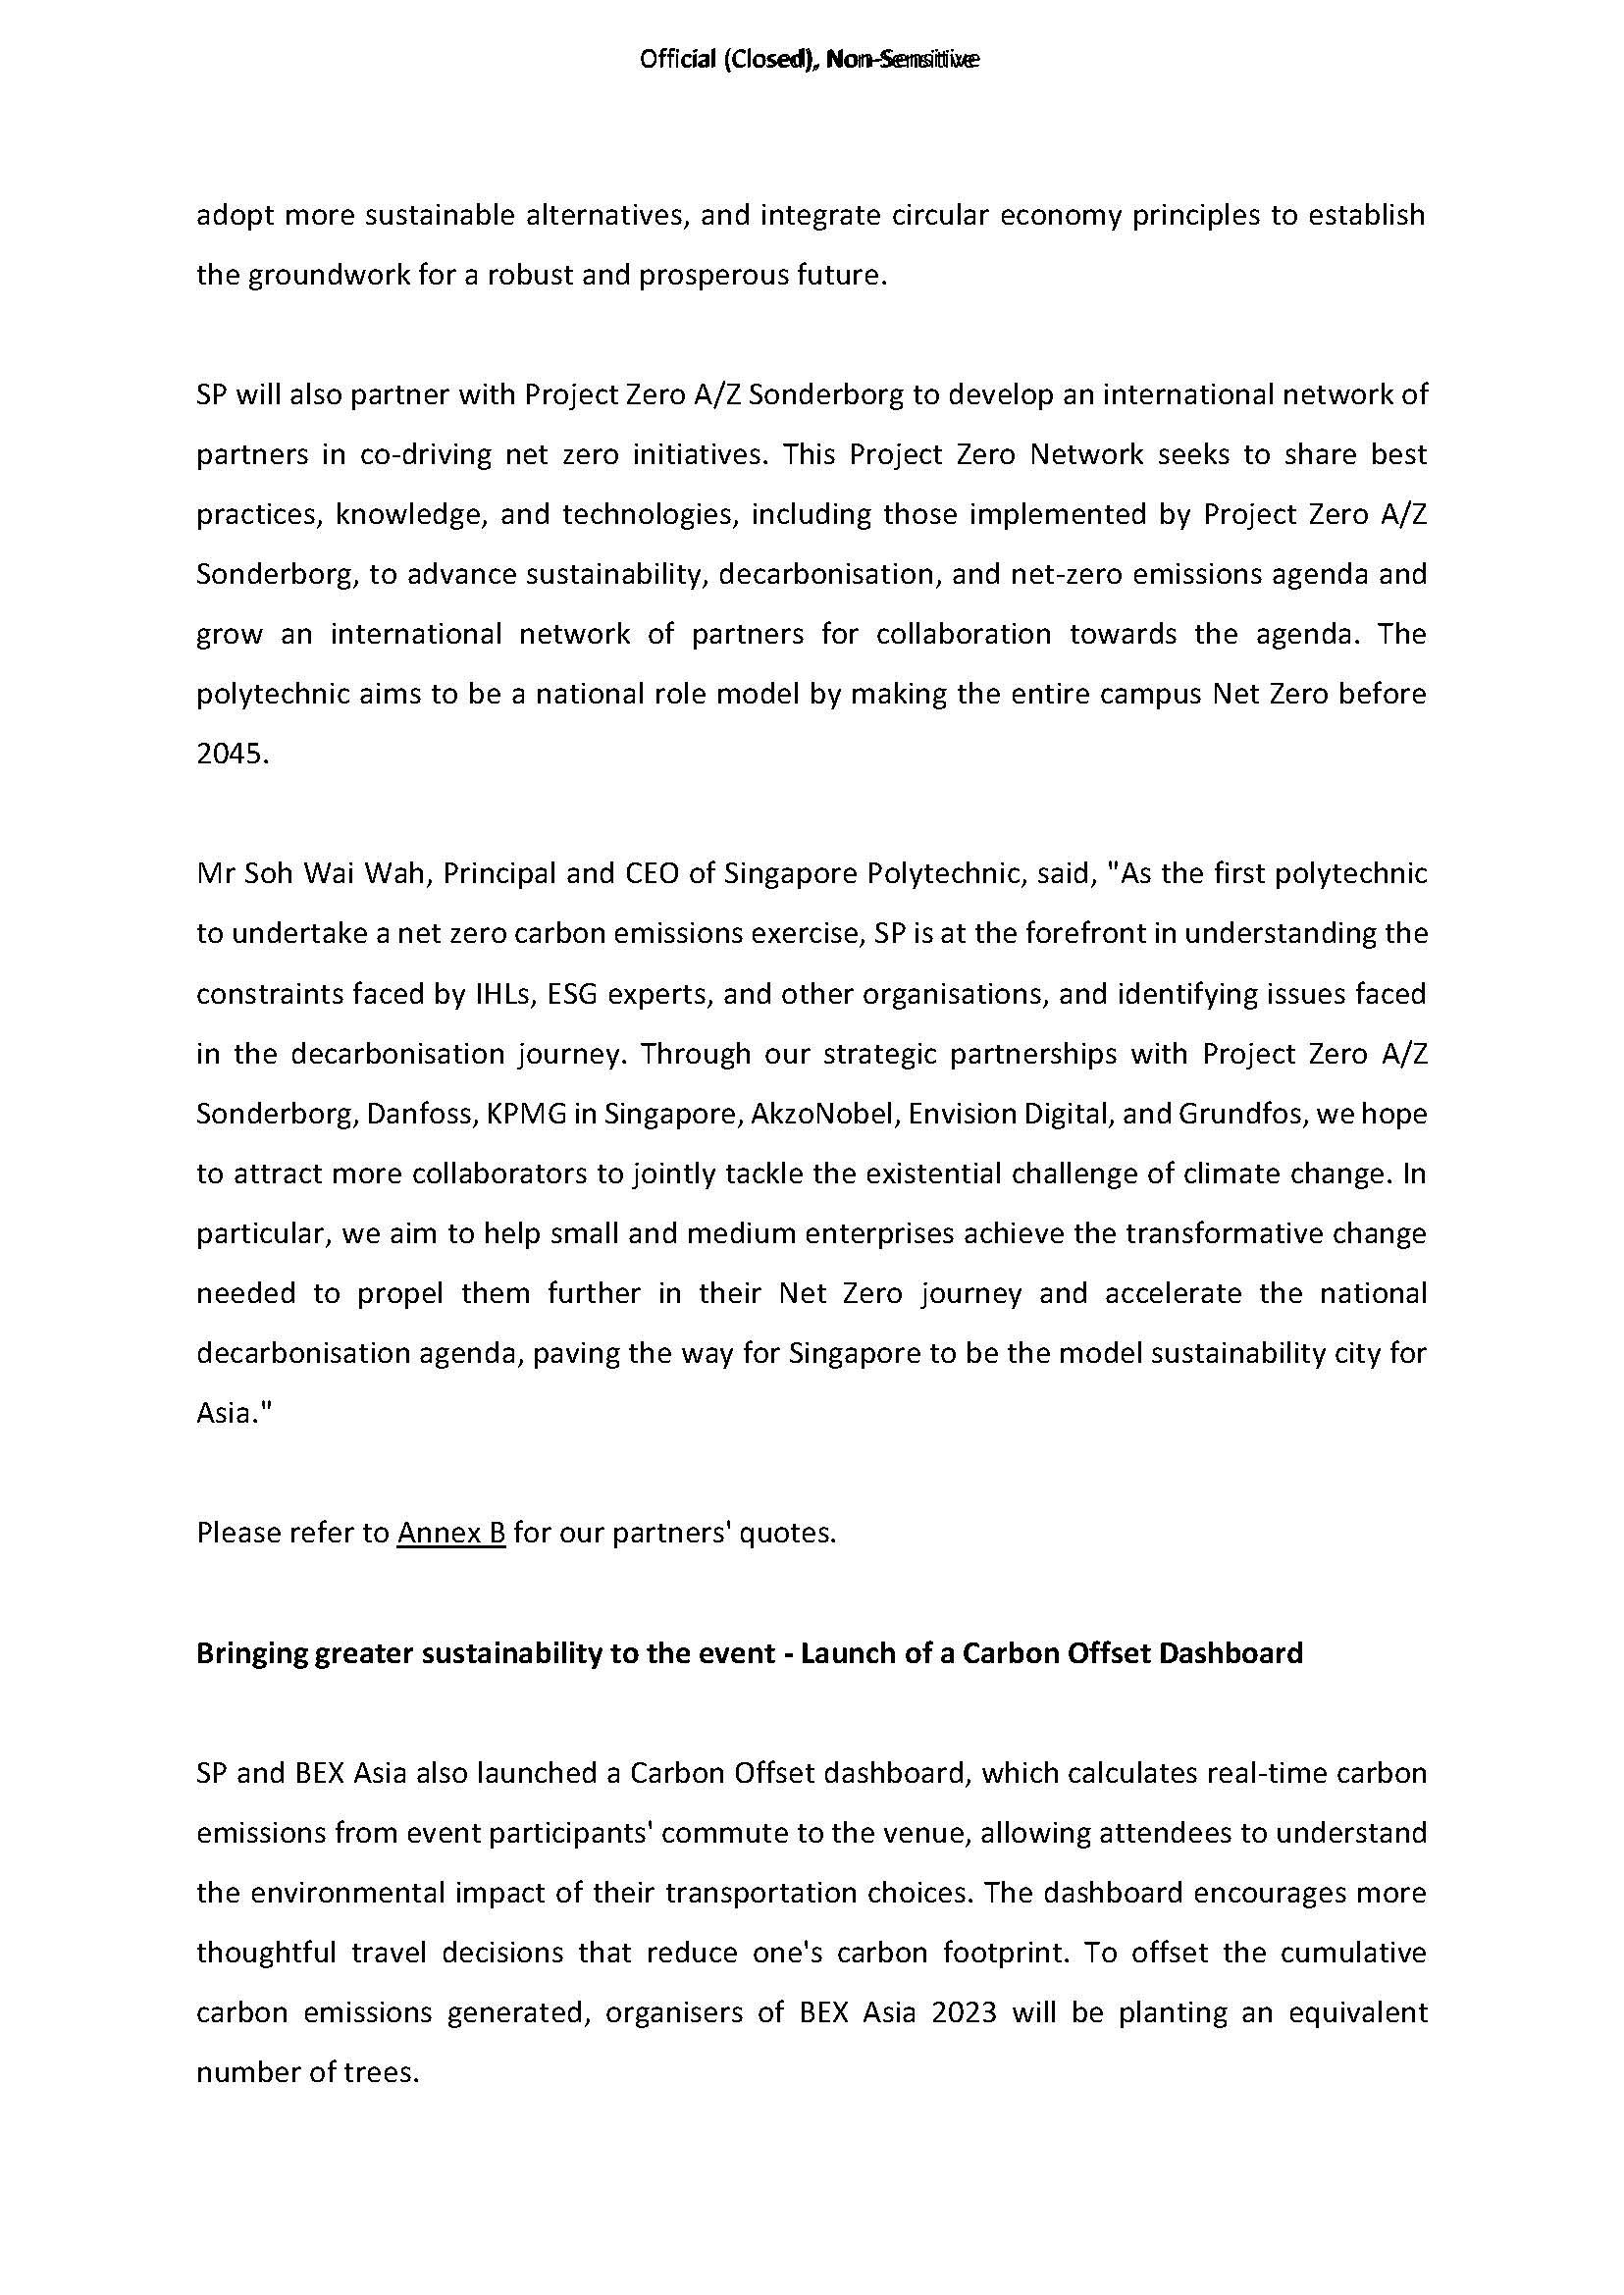 MEDIA RELEASE-Singapore Polytechnic launches First Decarbonisation Playbook here for education institutions_060923_Page_2